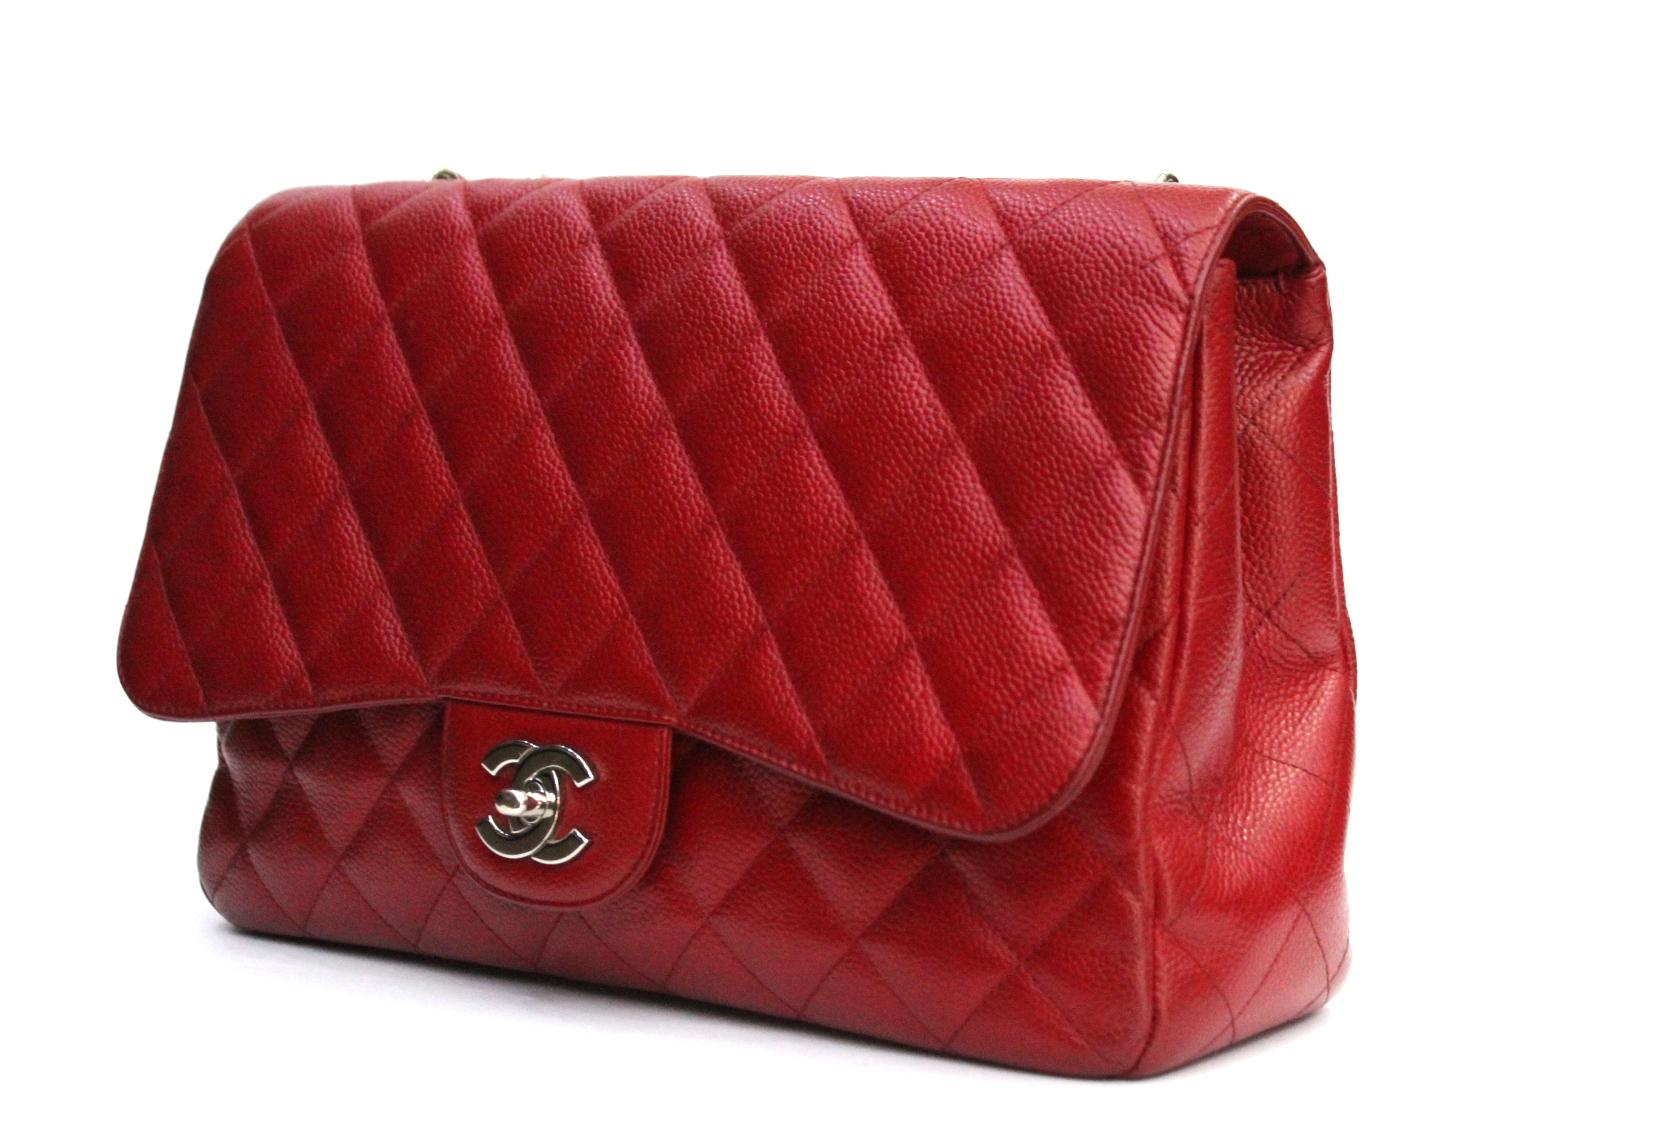 Classic and beautiful this Chanel Jumbo. It is made with red caviar leather and silver hardware.
Year 2009/2010
Good condition
We have a dustbag but we haven't card 